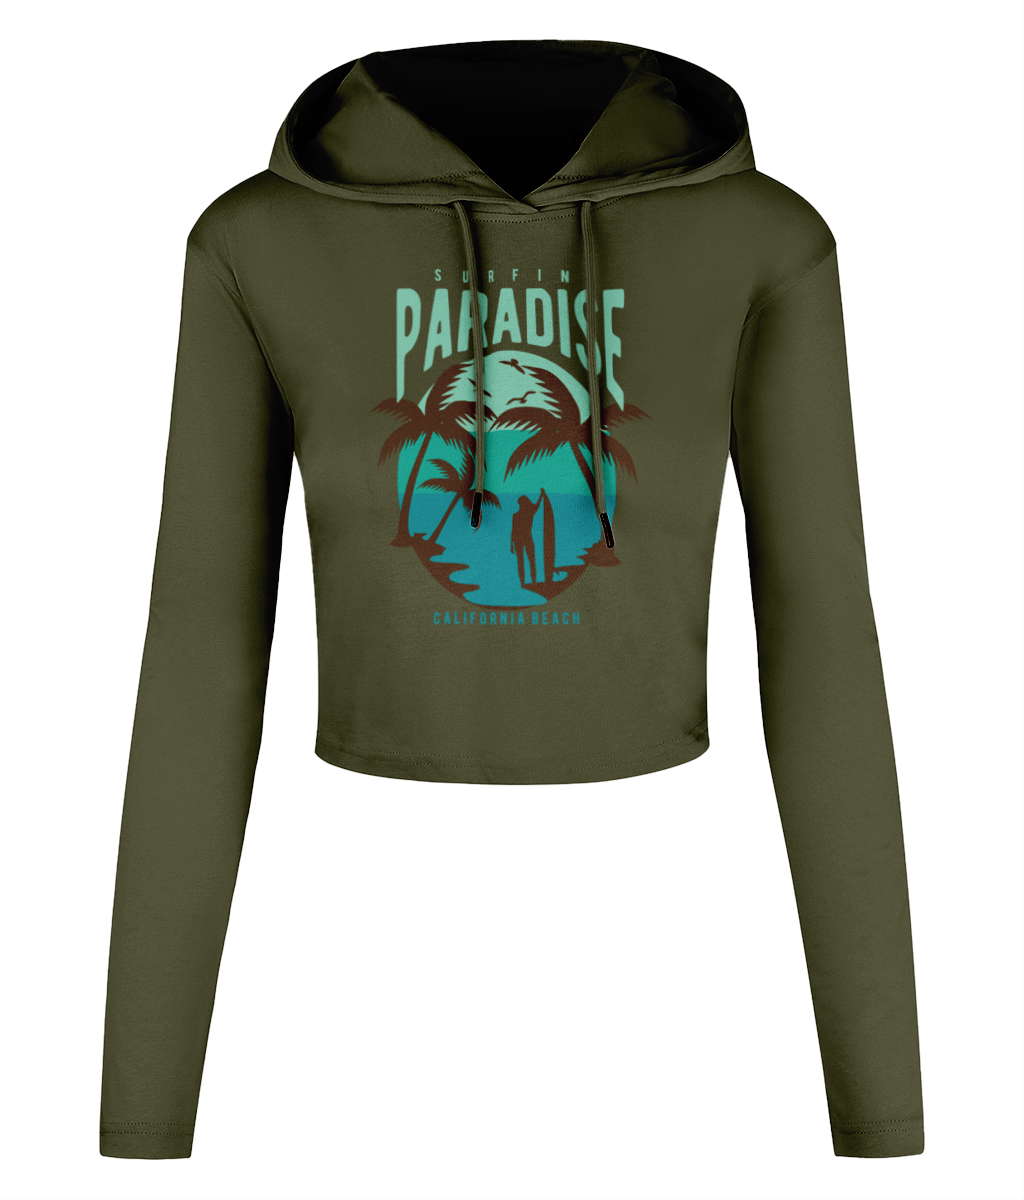 Surfing Paradise California Beach – Women’s Cropped Hooded T-shirt